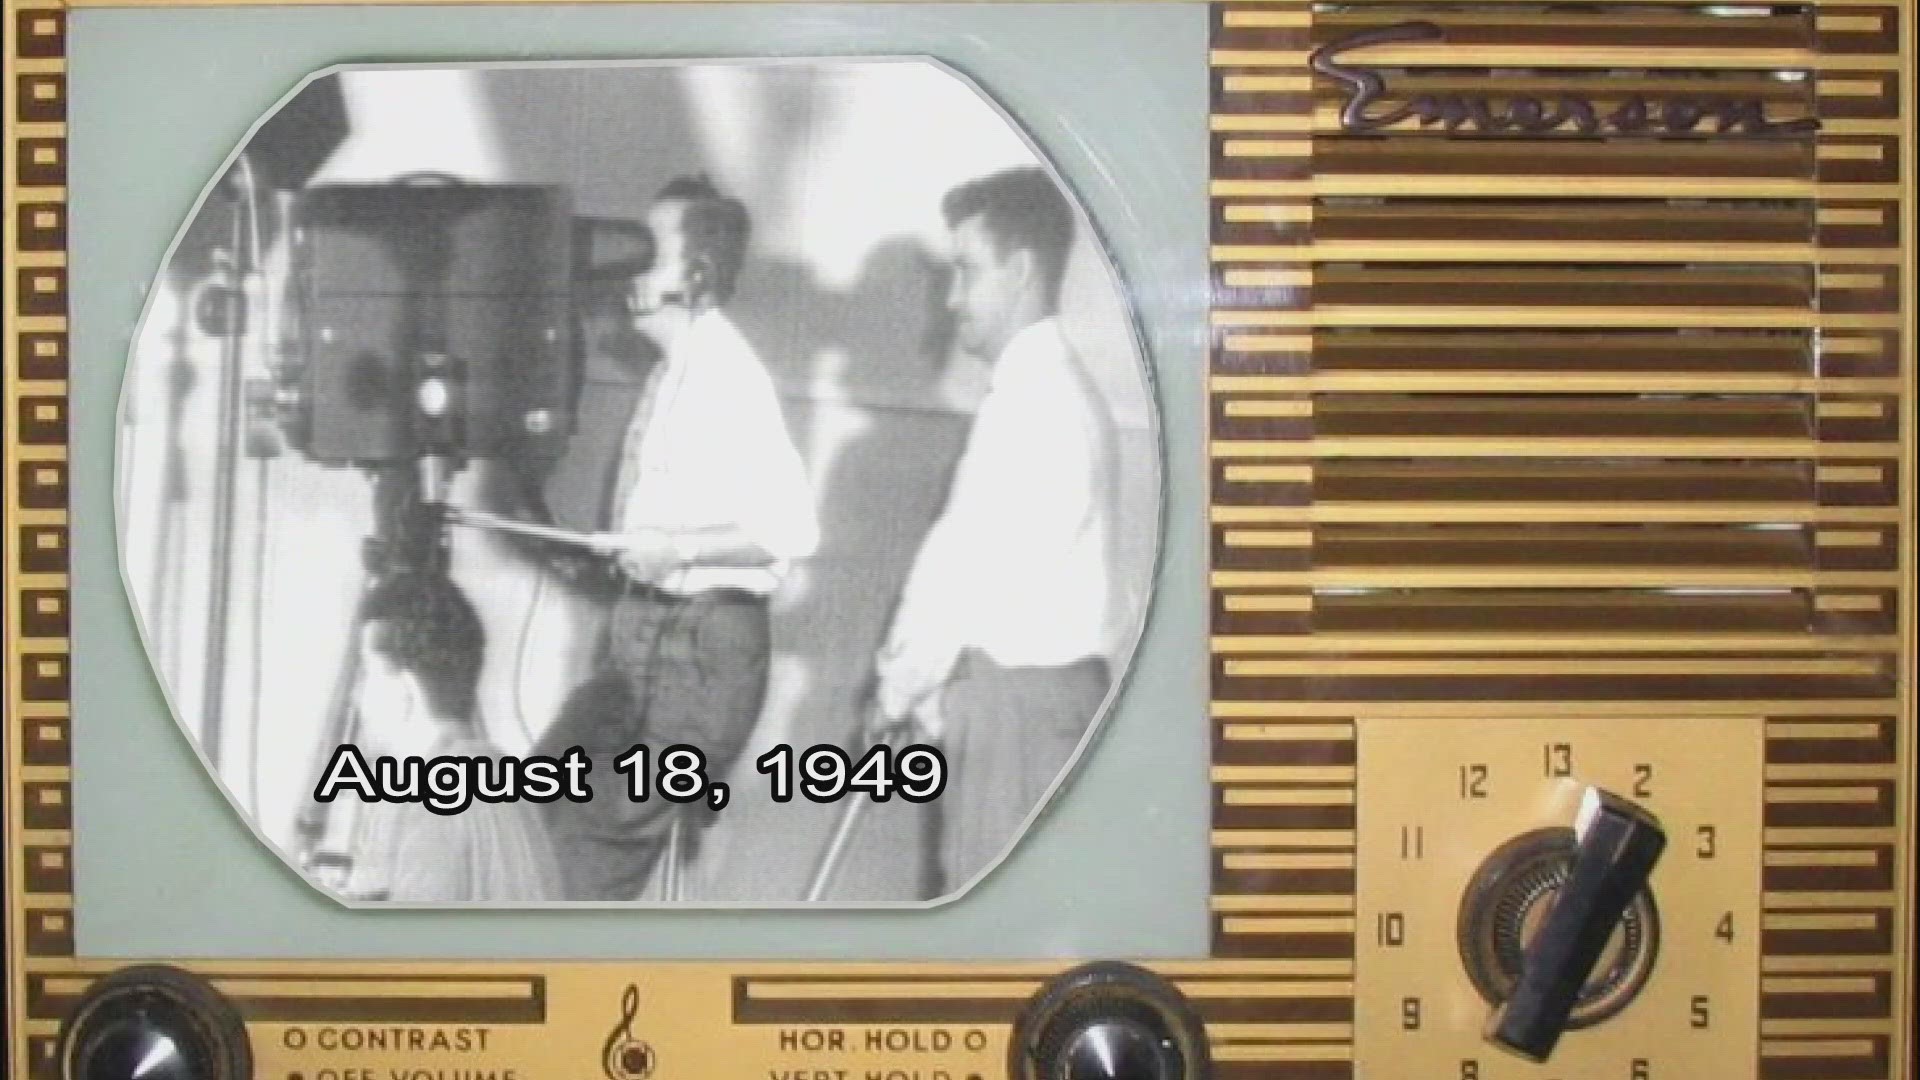 On August 18, 1949, WFMY-TV launched its first live television broadcast.